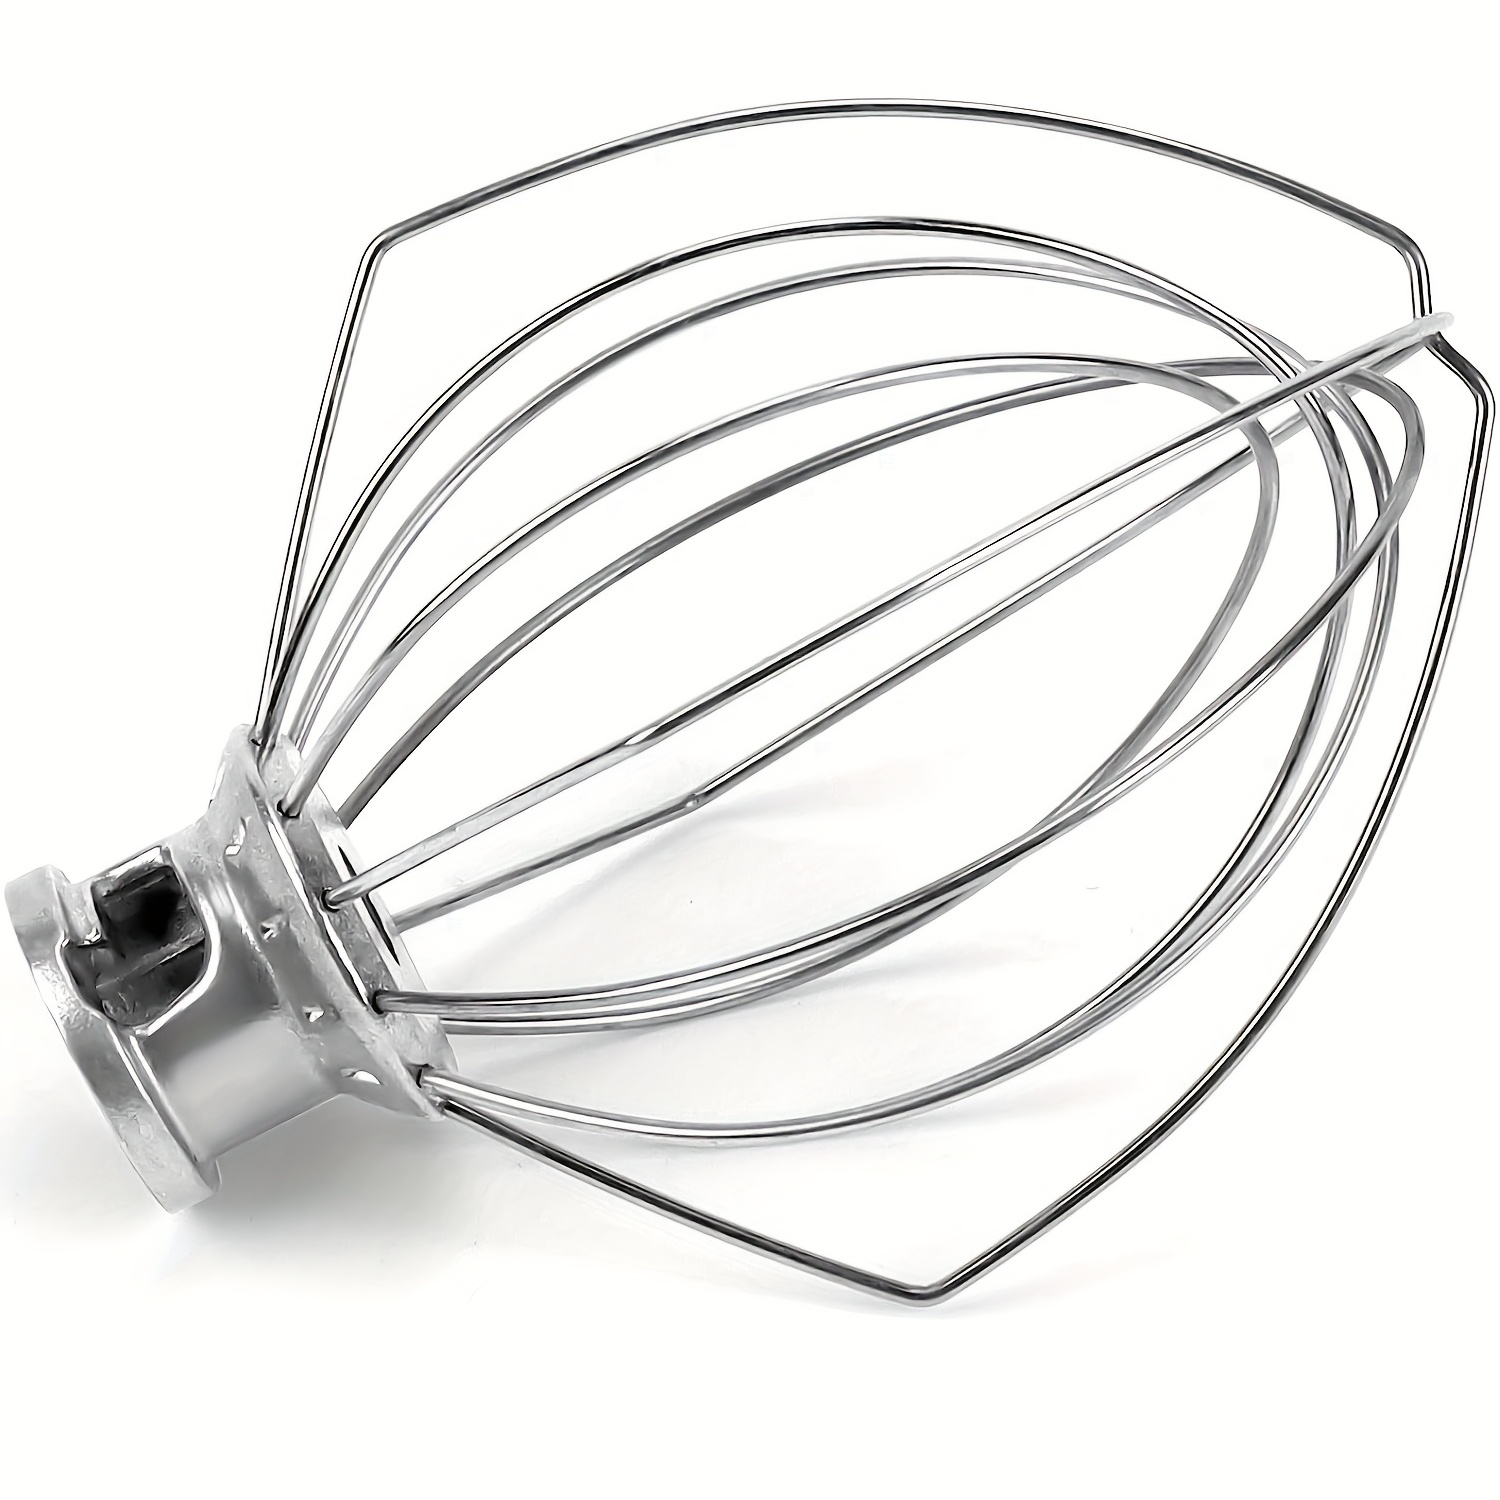 Bowl-Lift 6-Wire Whip